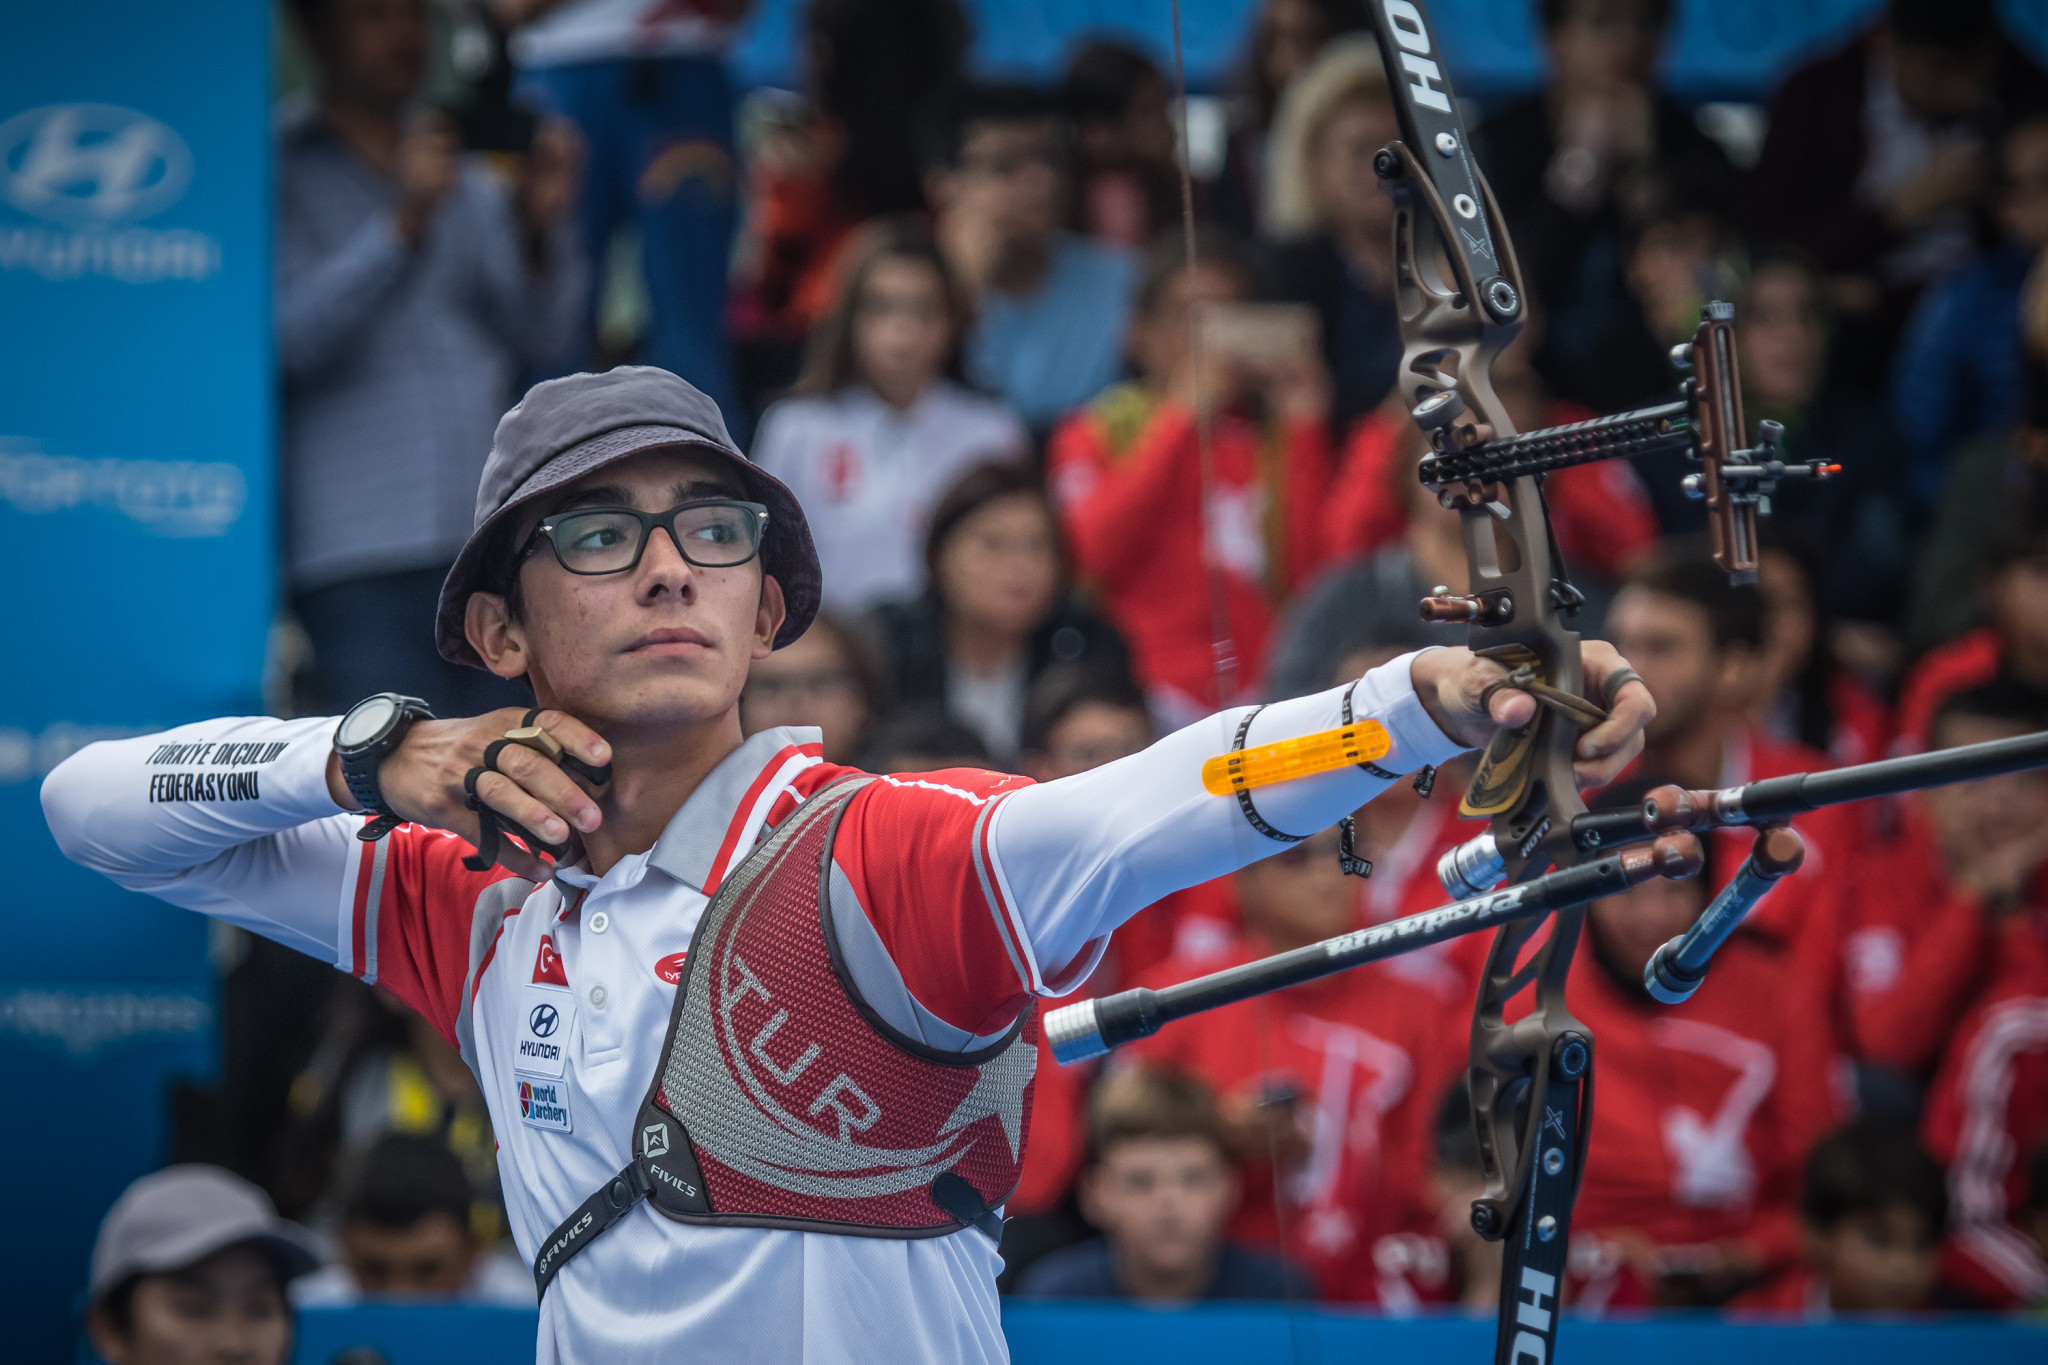 Turkish duo earn recurve prizes at World Archery Athlete of the Year awards